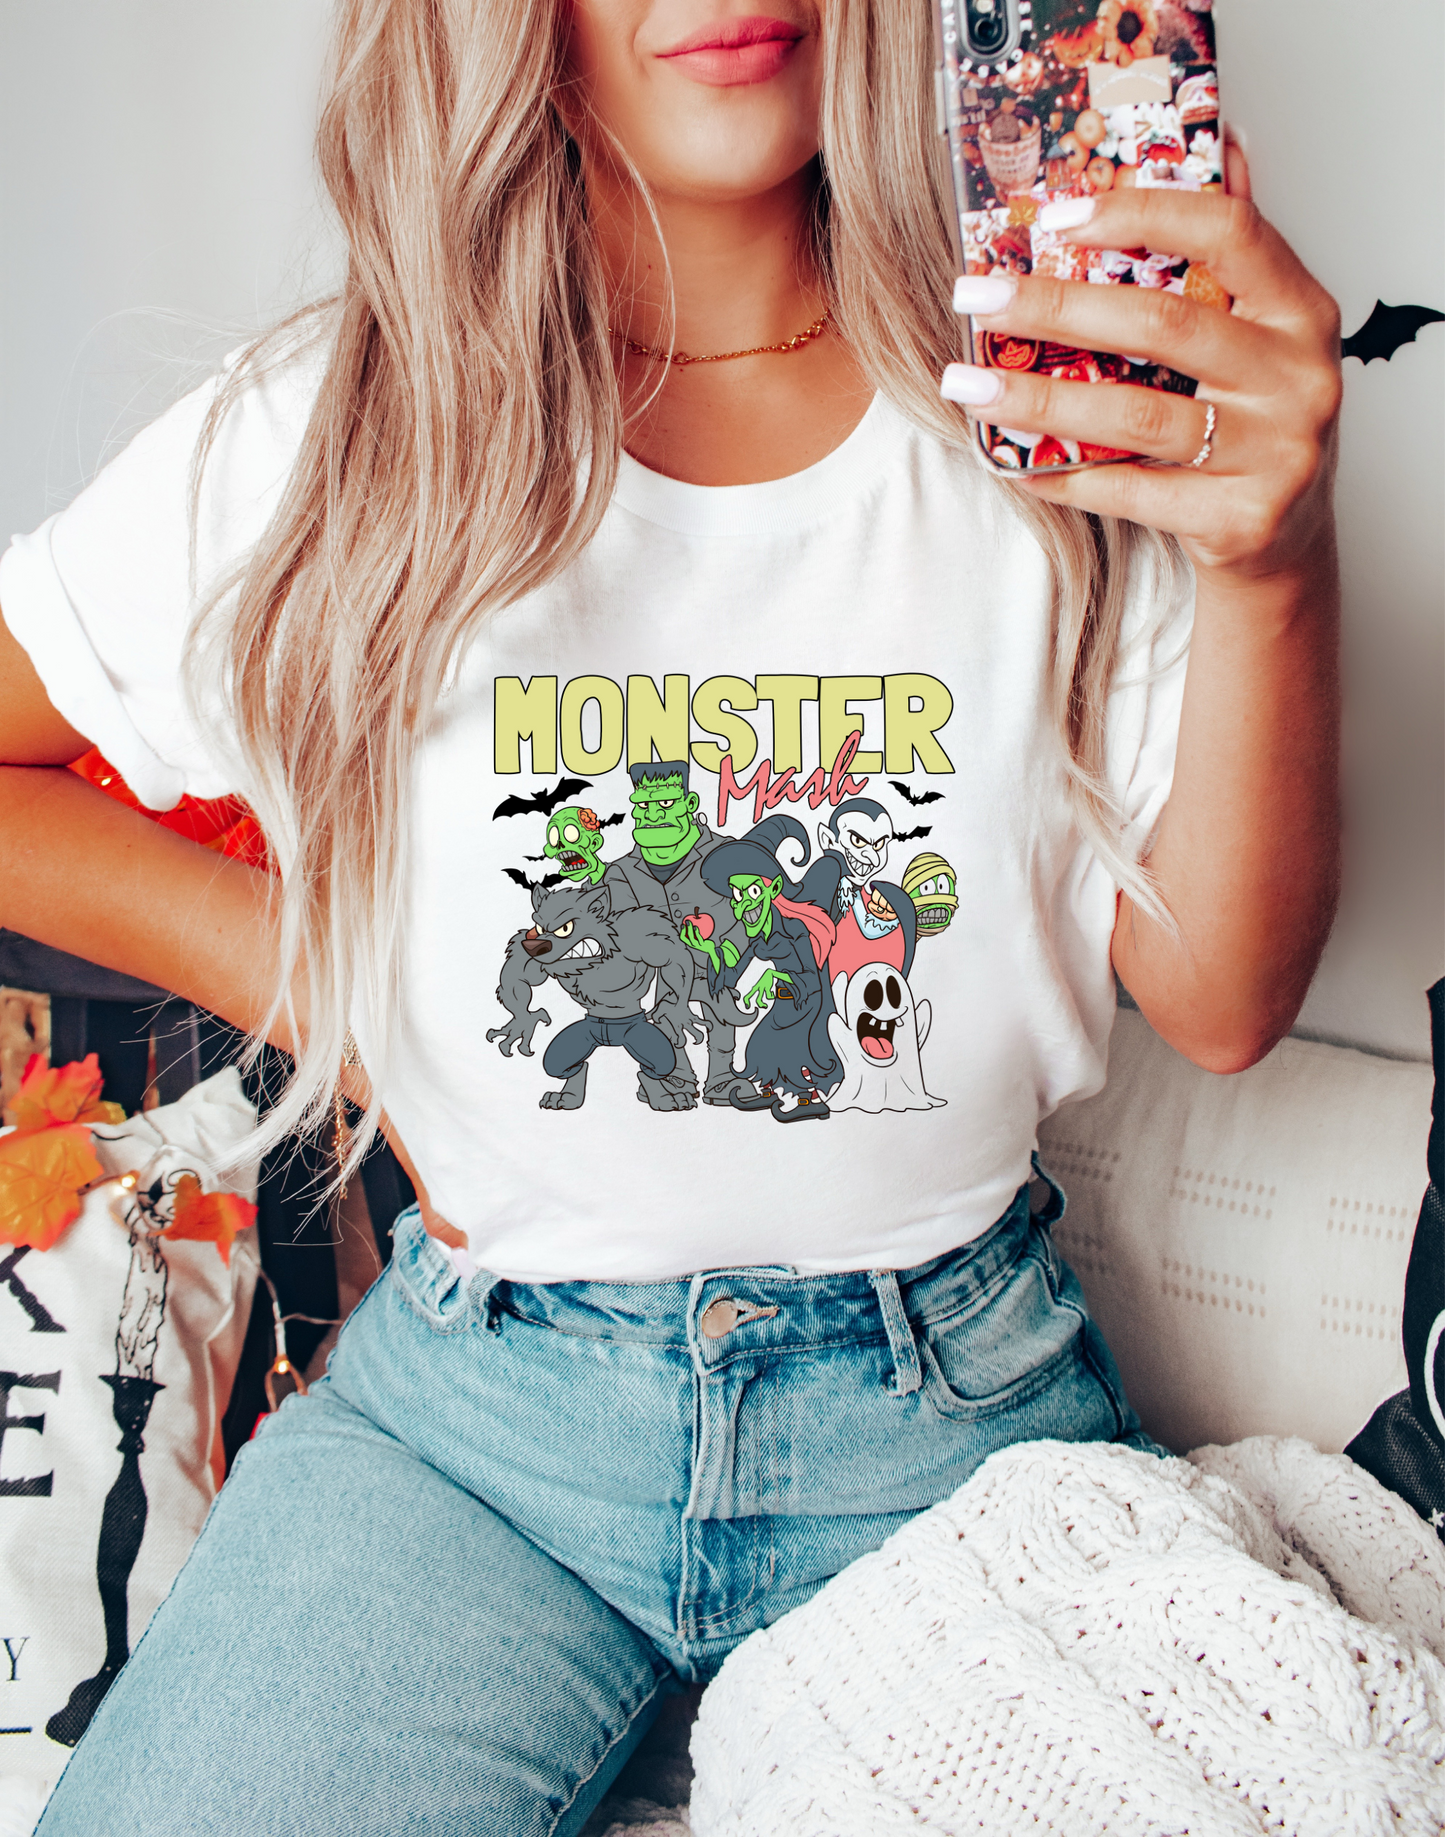 Monster mash deal of the day tee